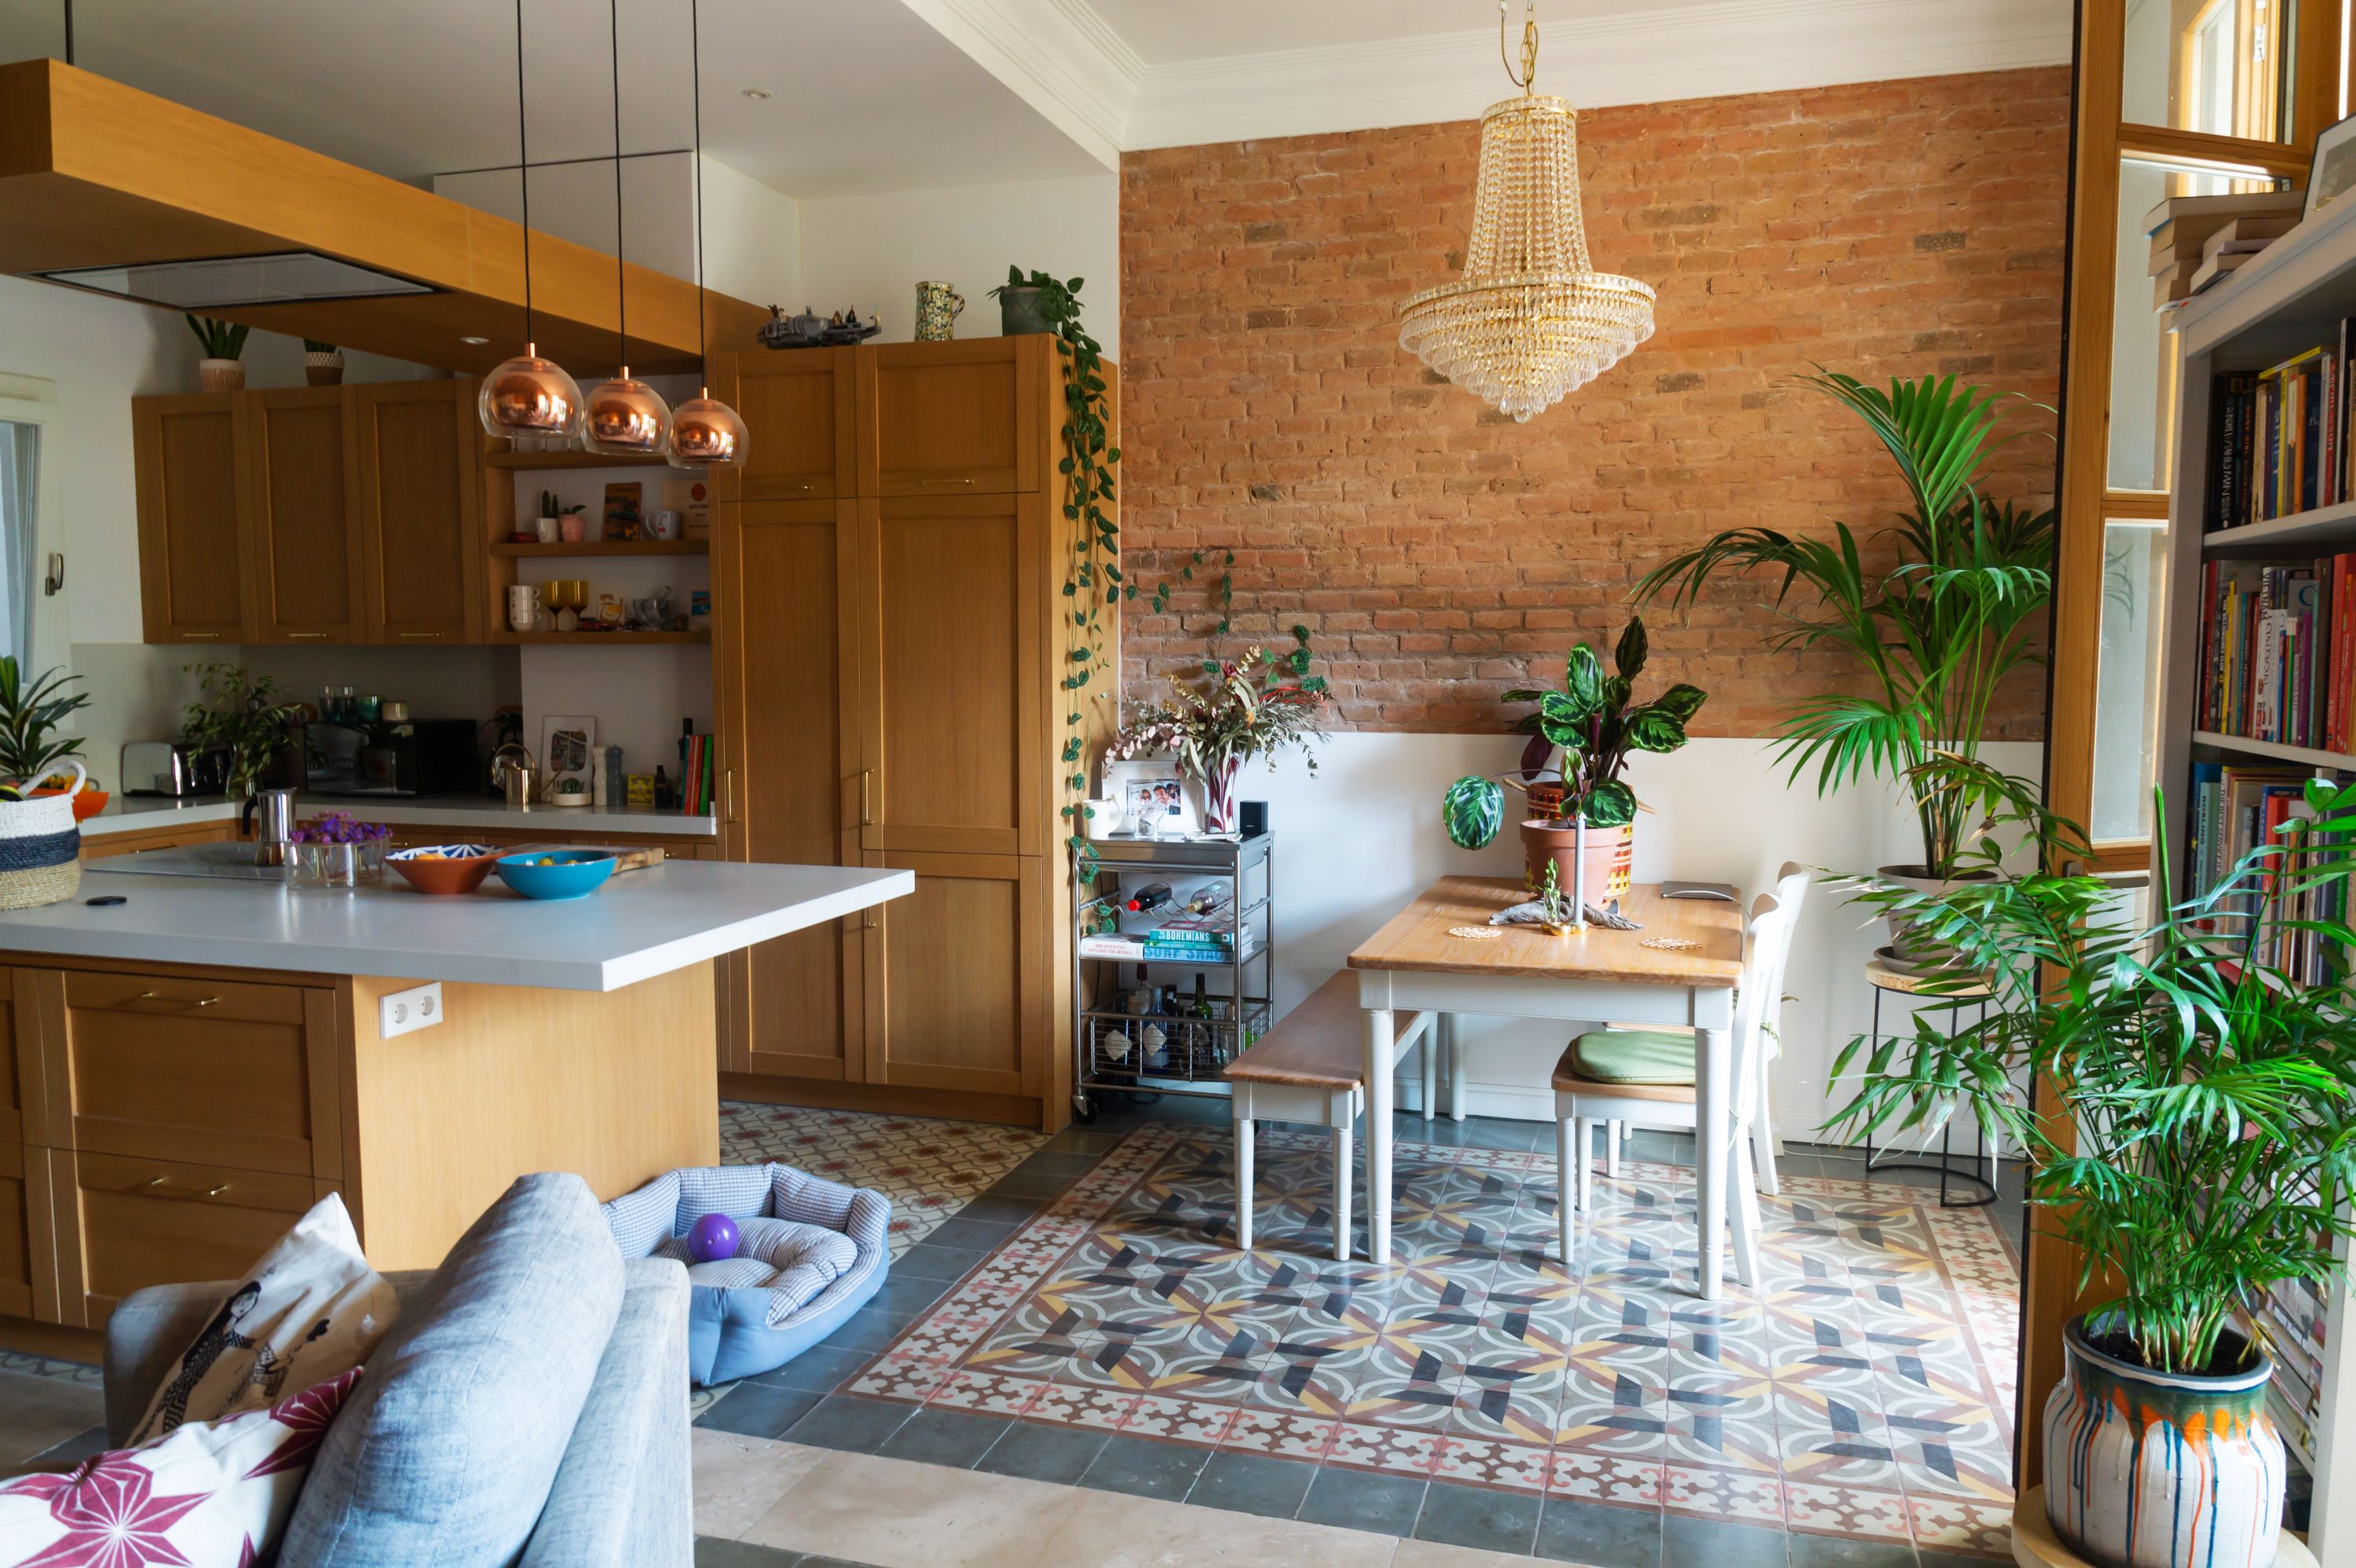 Gemma home tour Barcelona open space with kitchen and dining table with tile floor